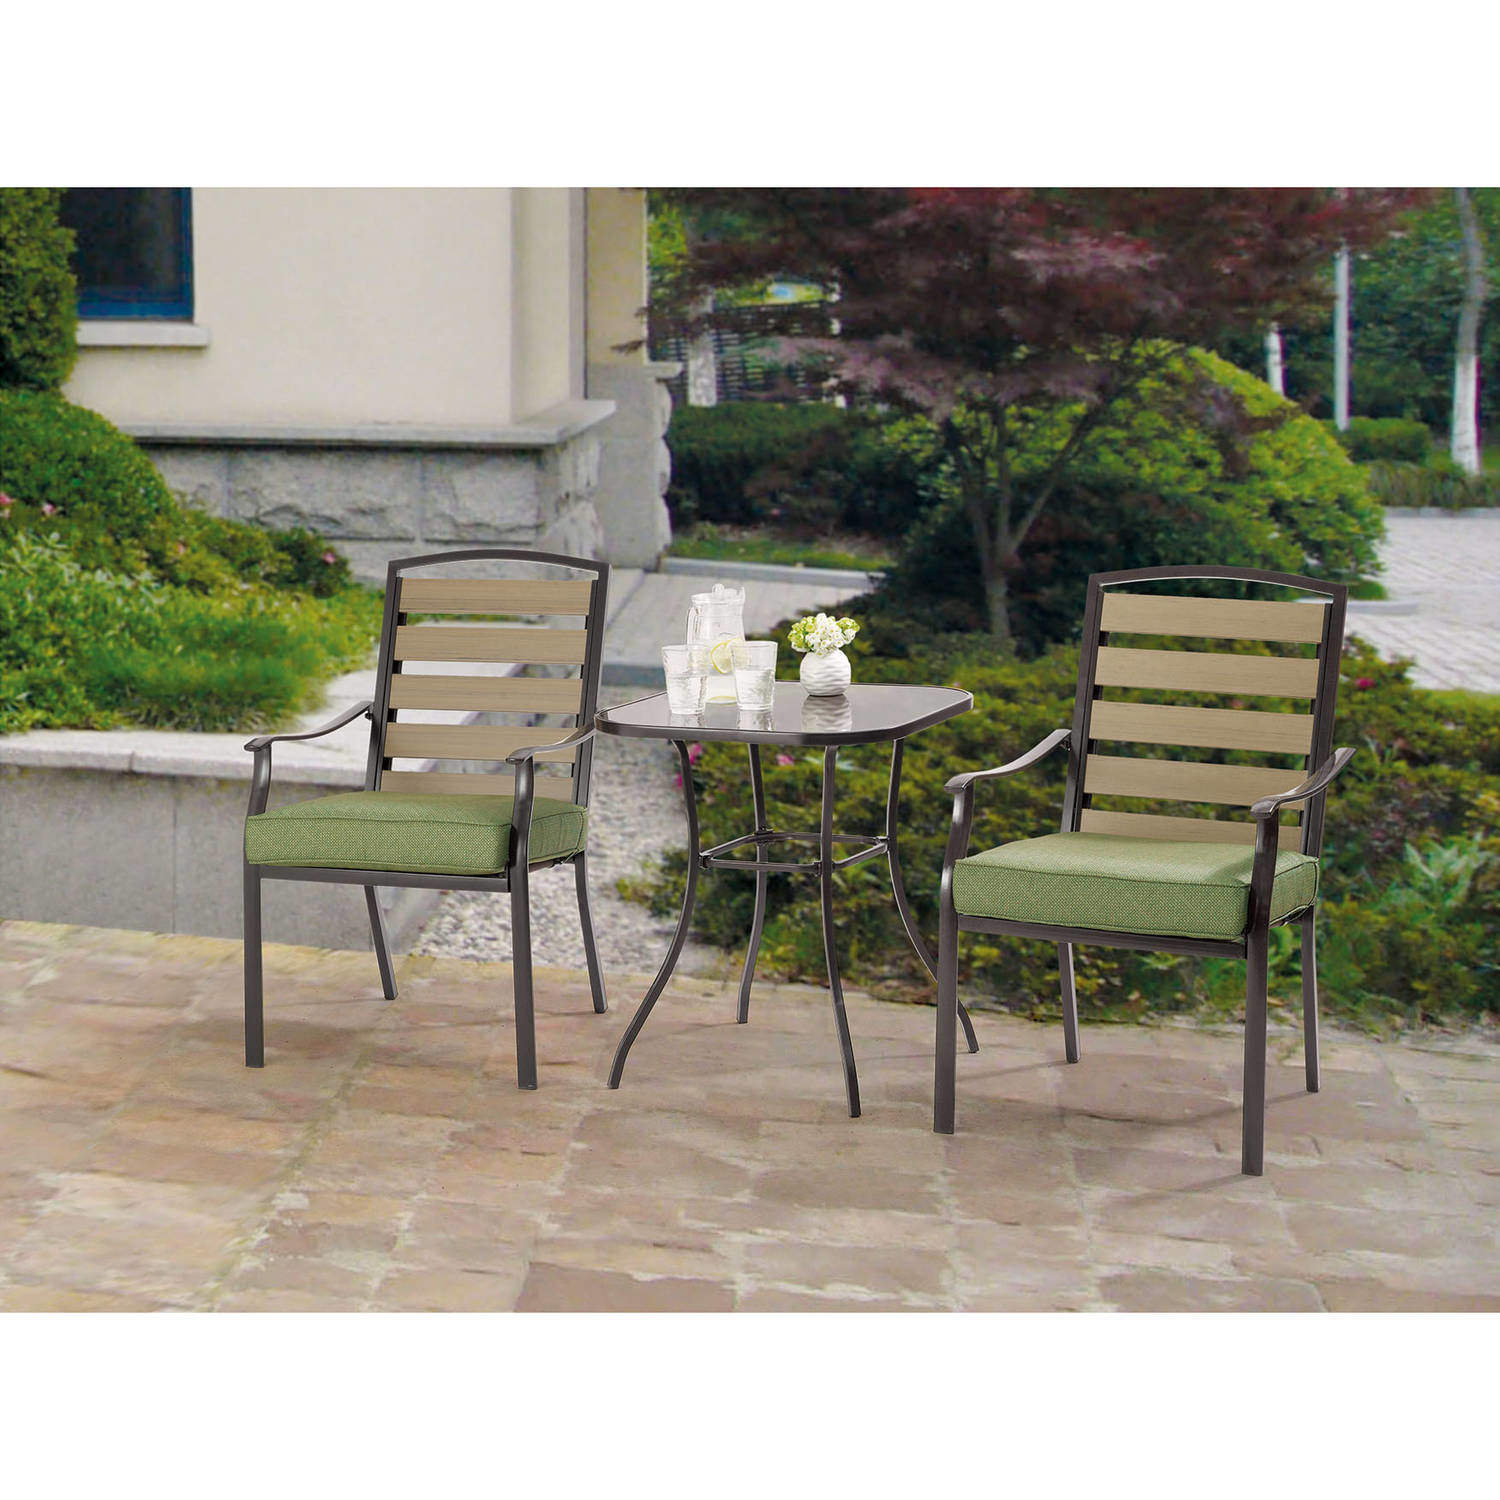 Furniture Replacement Parts Outdoor Folding Padded Green Chair Pool Deck Garden Mainstays Patio